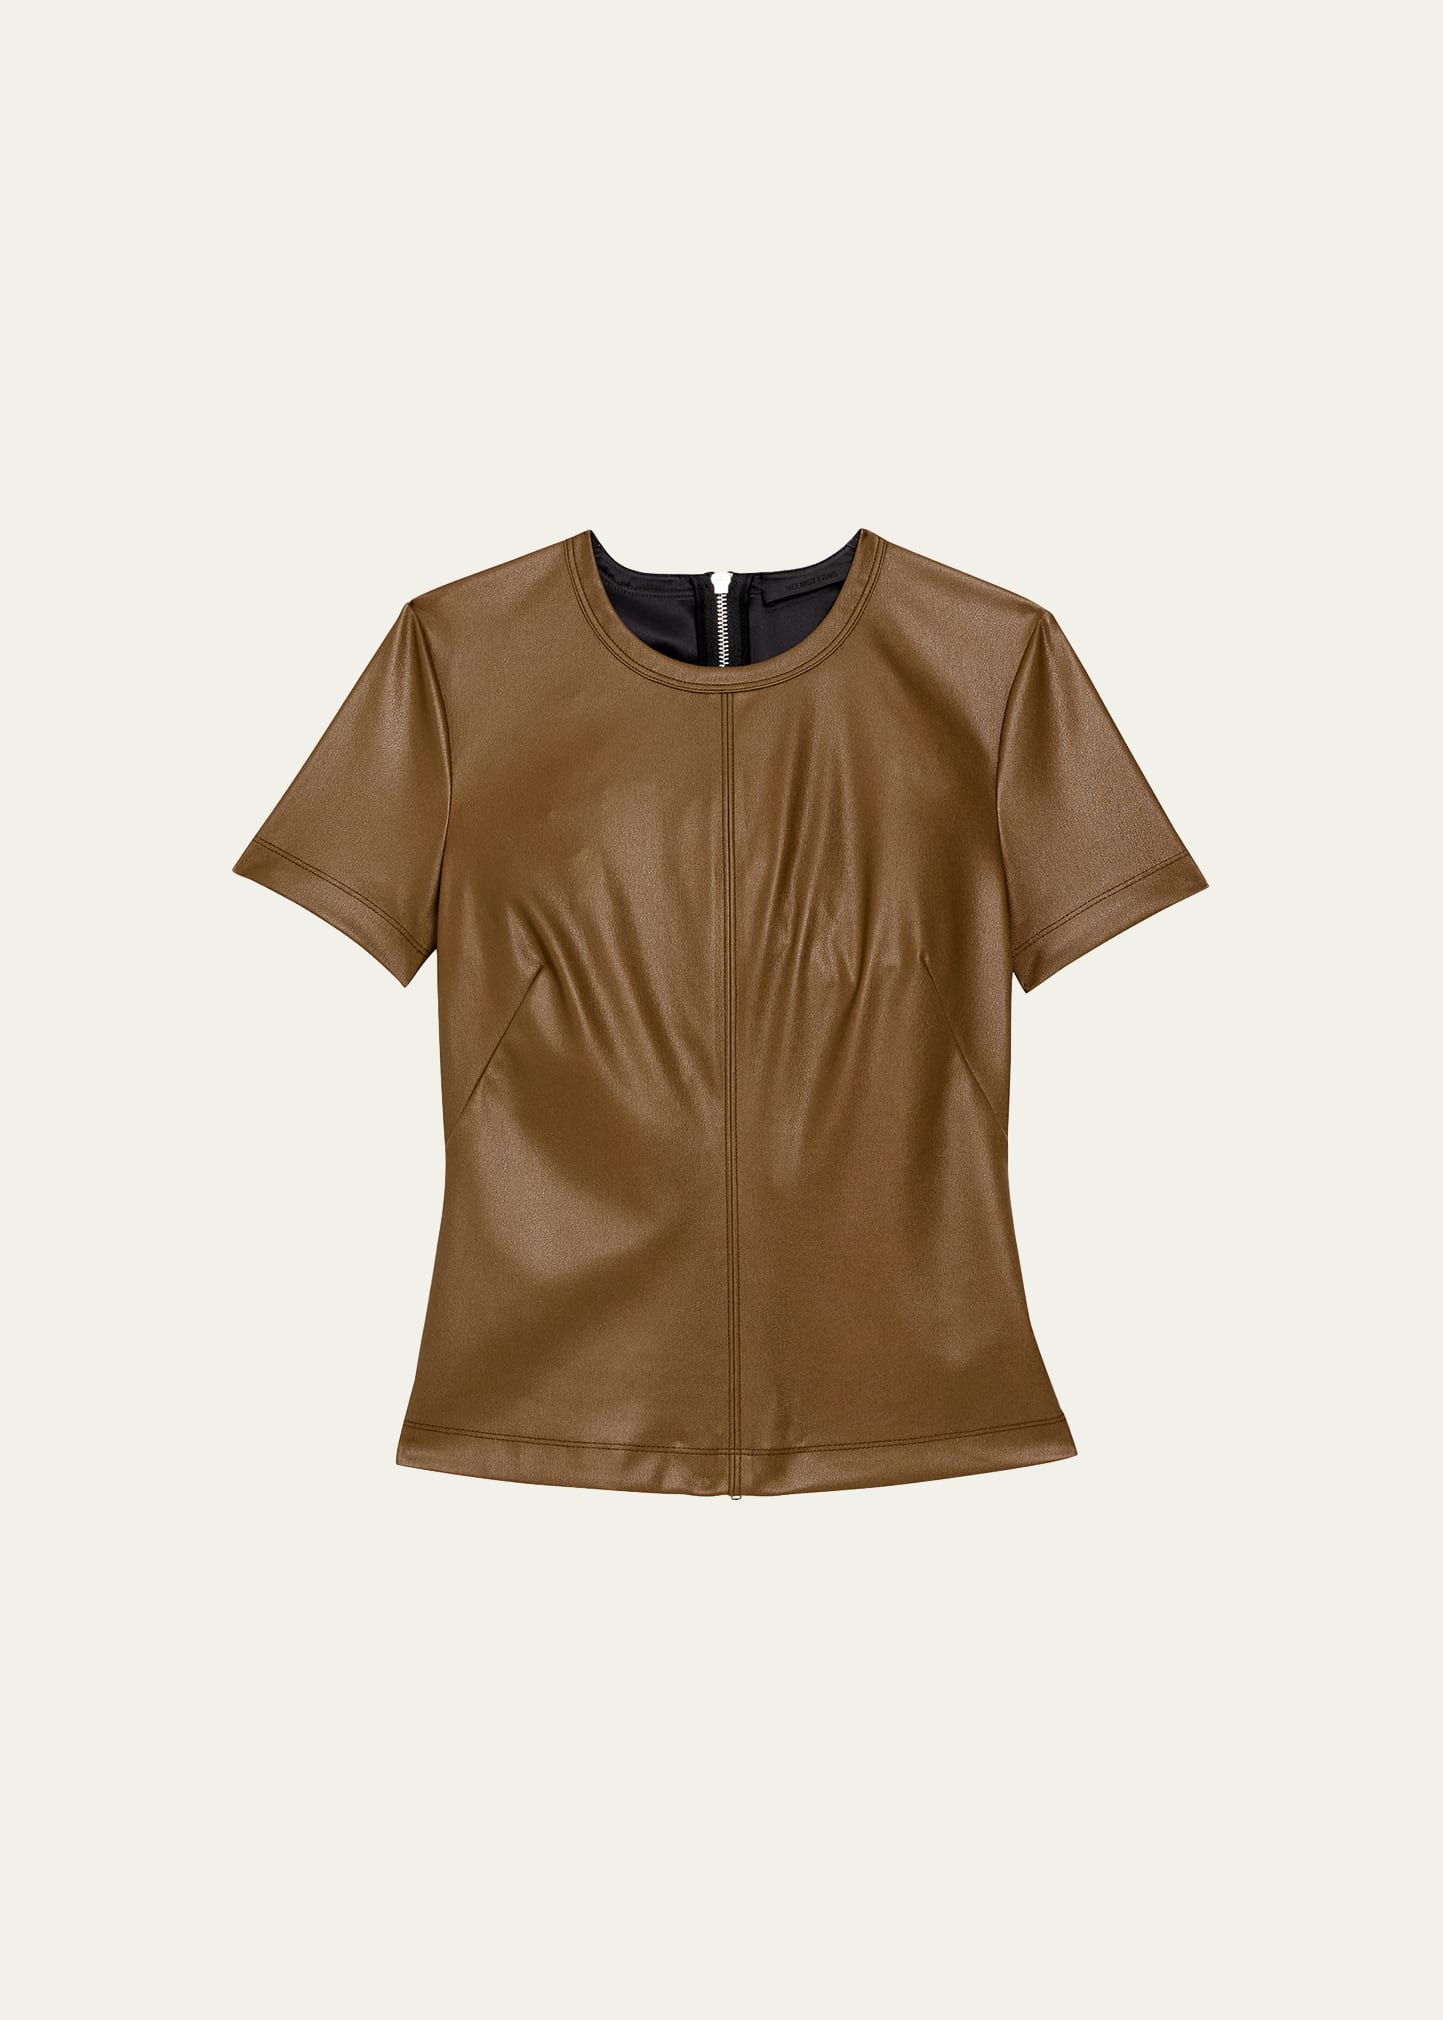 Helmut Lang Faux Leather Tee In Cigar